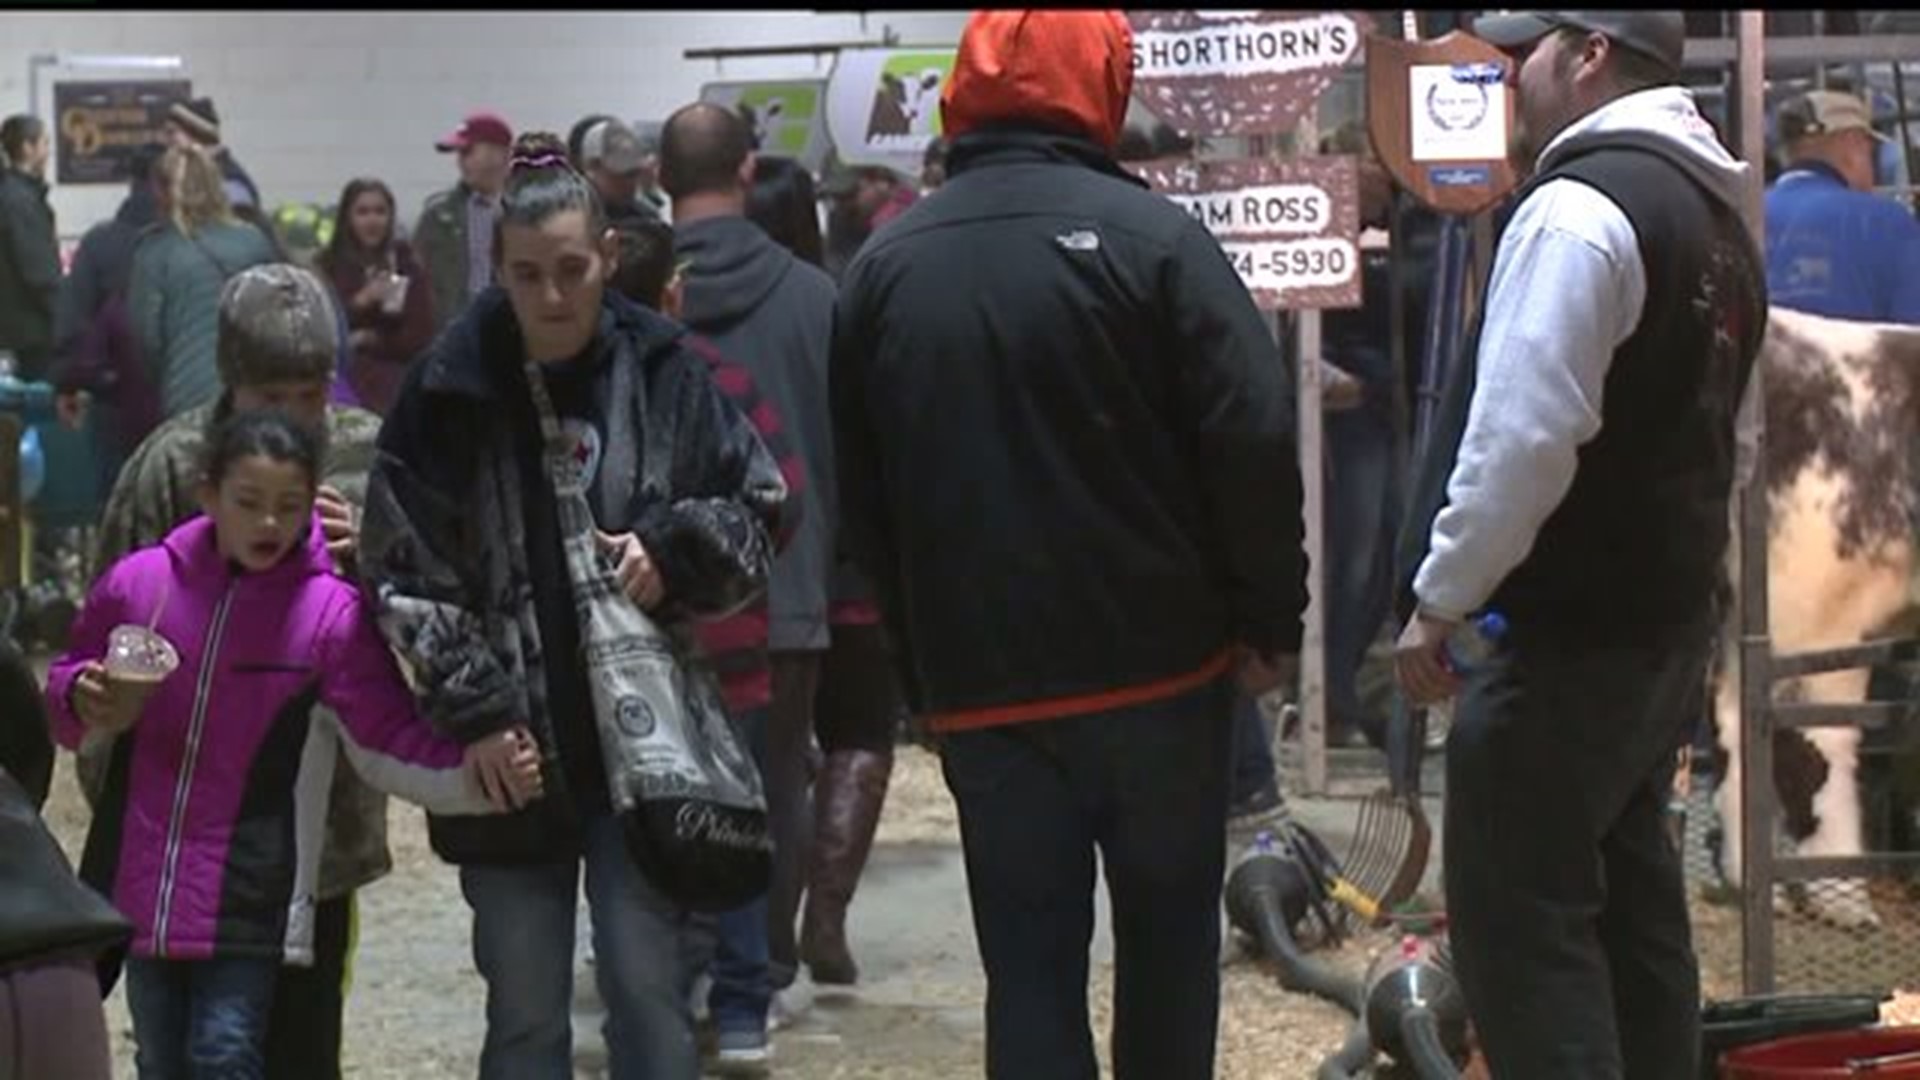 Thousands enjoy milkshakes, exhibits and animals at the 101st Pa. Farm Show